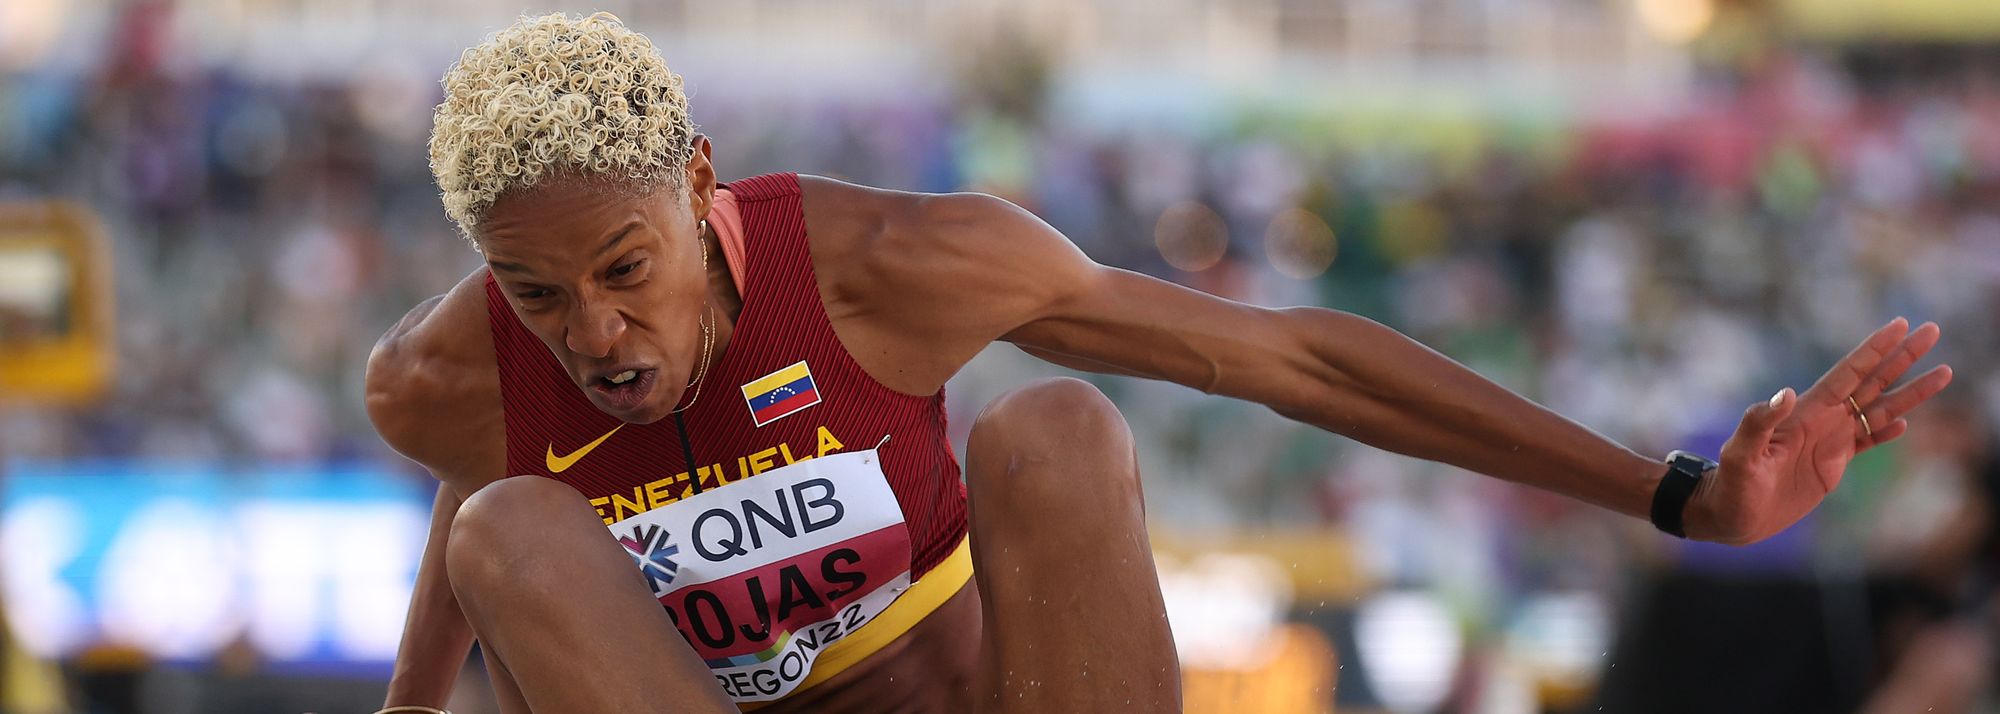 Yulimar Rojas is one of the most colourful athletes of track and field's present era. Venezuela’s world record holder triple jumper could win up to two gold medals World Athletics Championships Budapest 23.